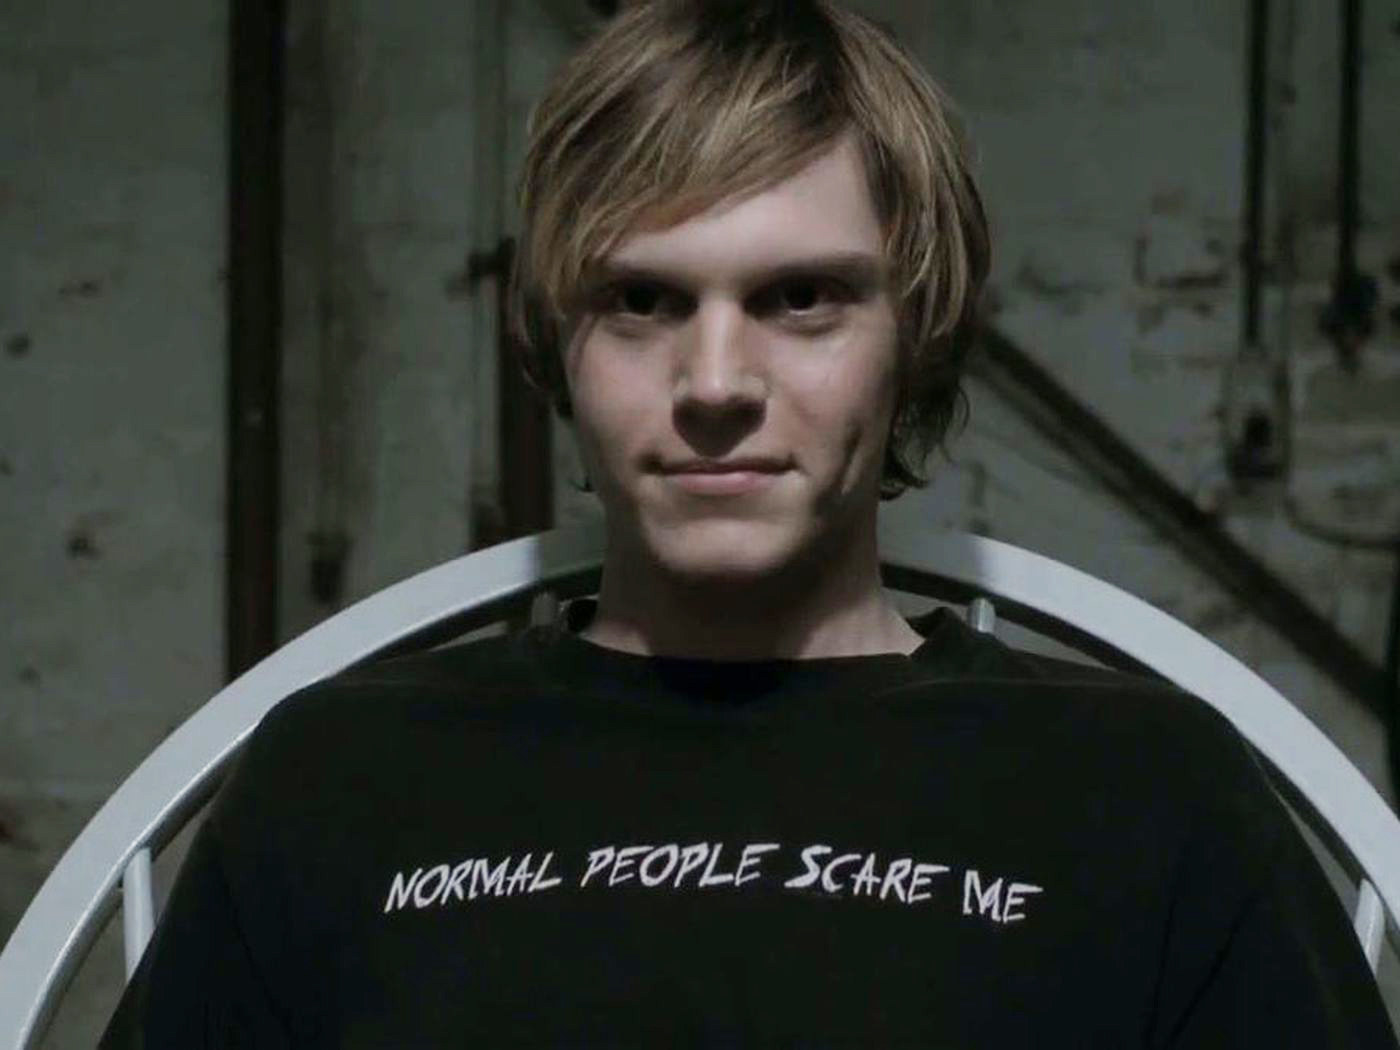 Tate from &quot;American Horror Story&quot; wears a shirt that says, &quot;Normal people scare me&quot;